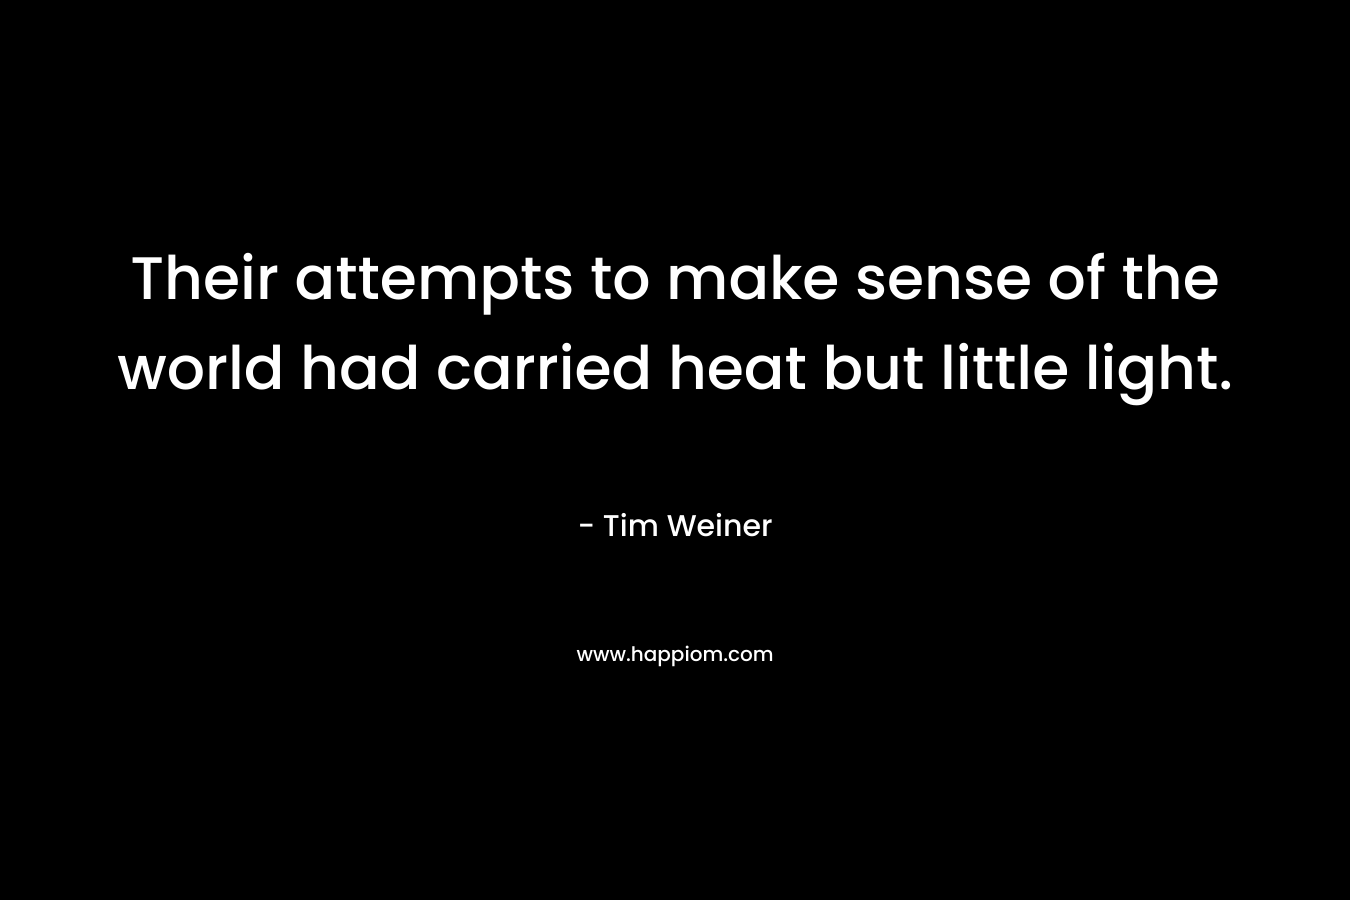 Their attempts to make sense of the world had carried heat but little light. – Tim Weiner